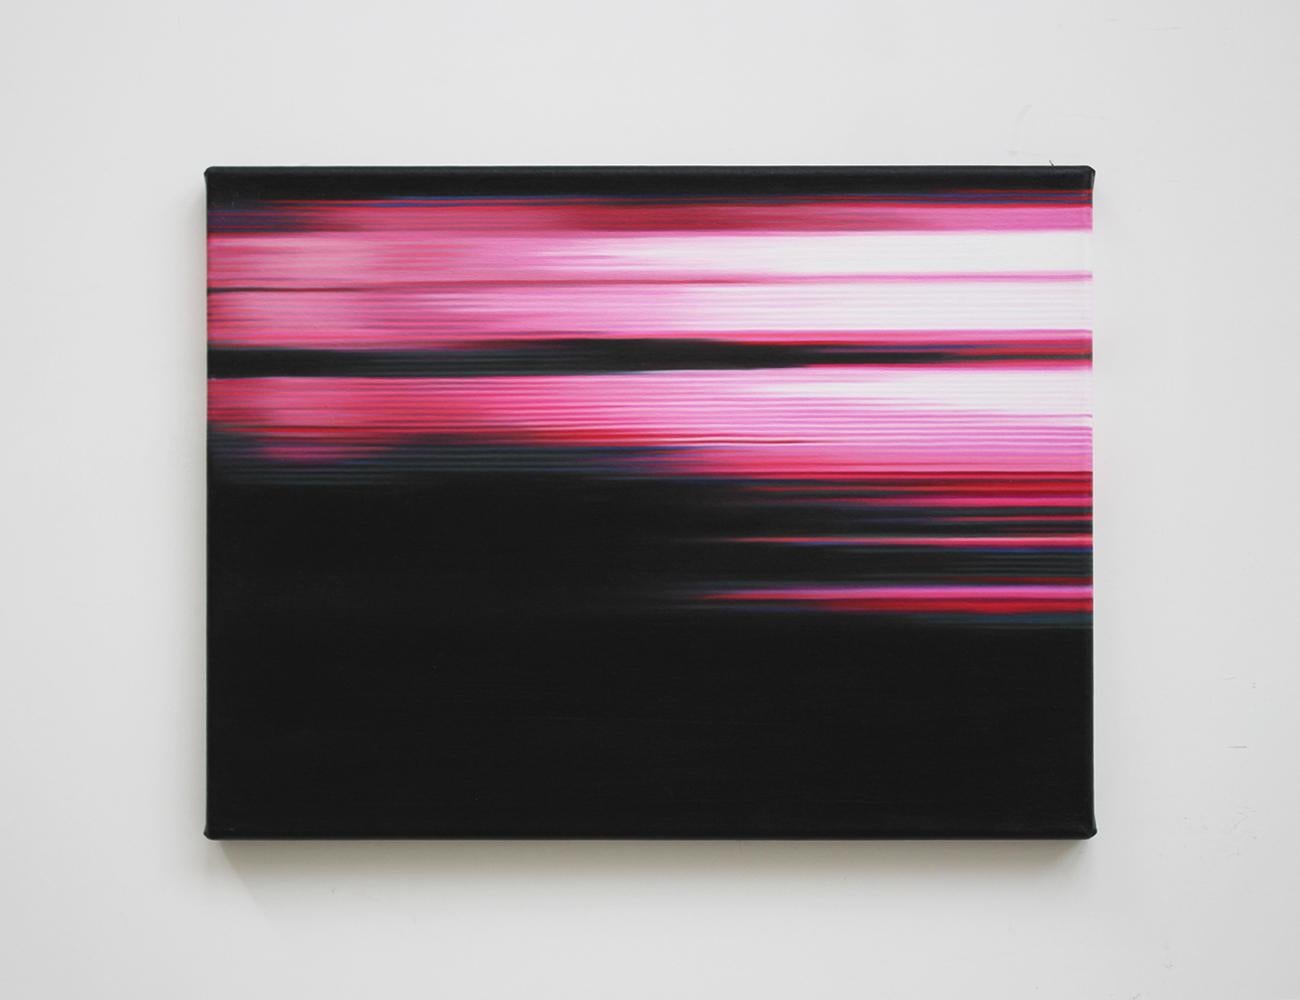 This work represents pink lines that stand out against a black background like a glow coming out of the night. It is a celebration of love, tenderness and passion between two beings. It could therefore be the ideal romantic gift to express your